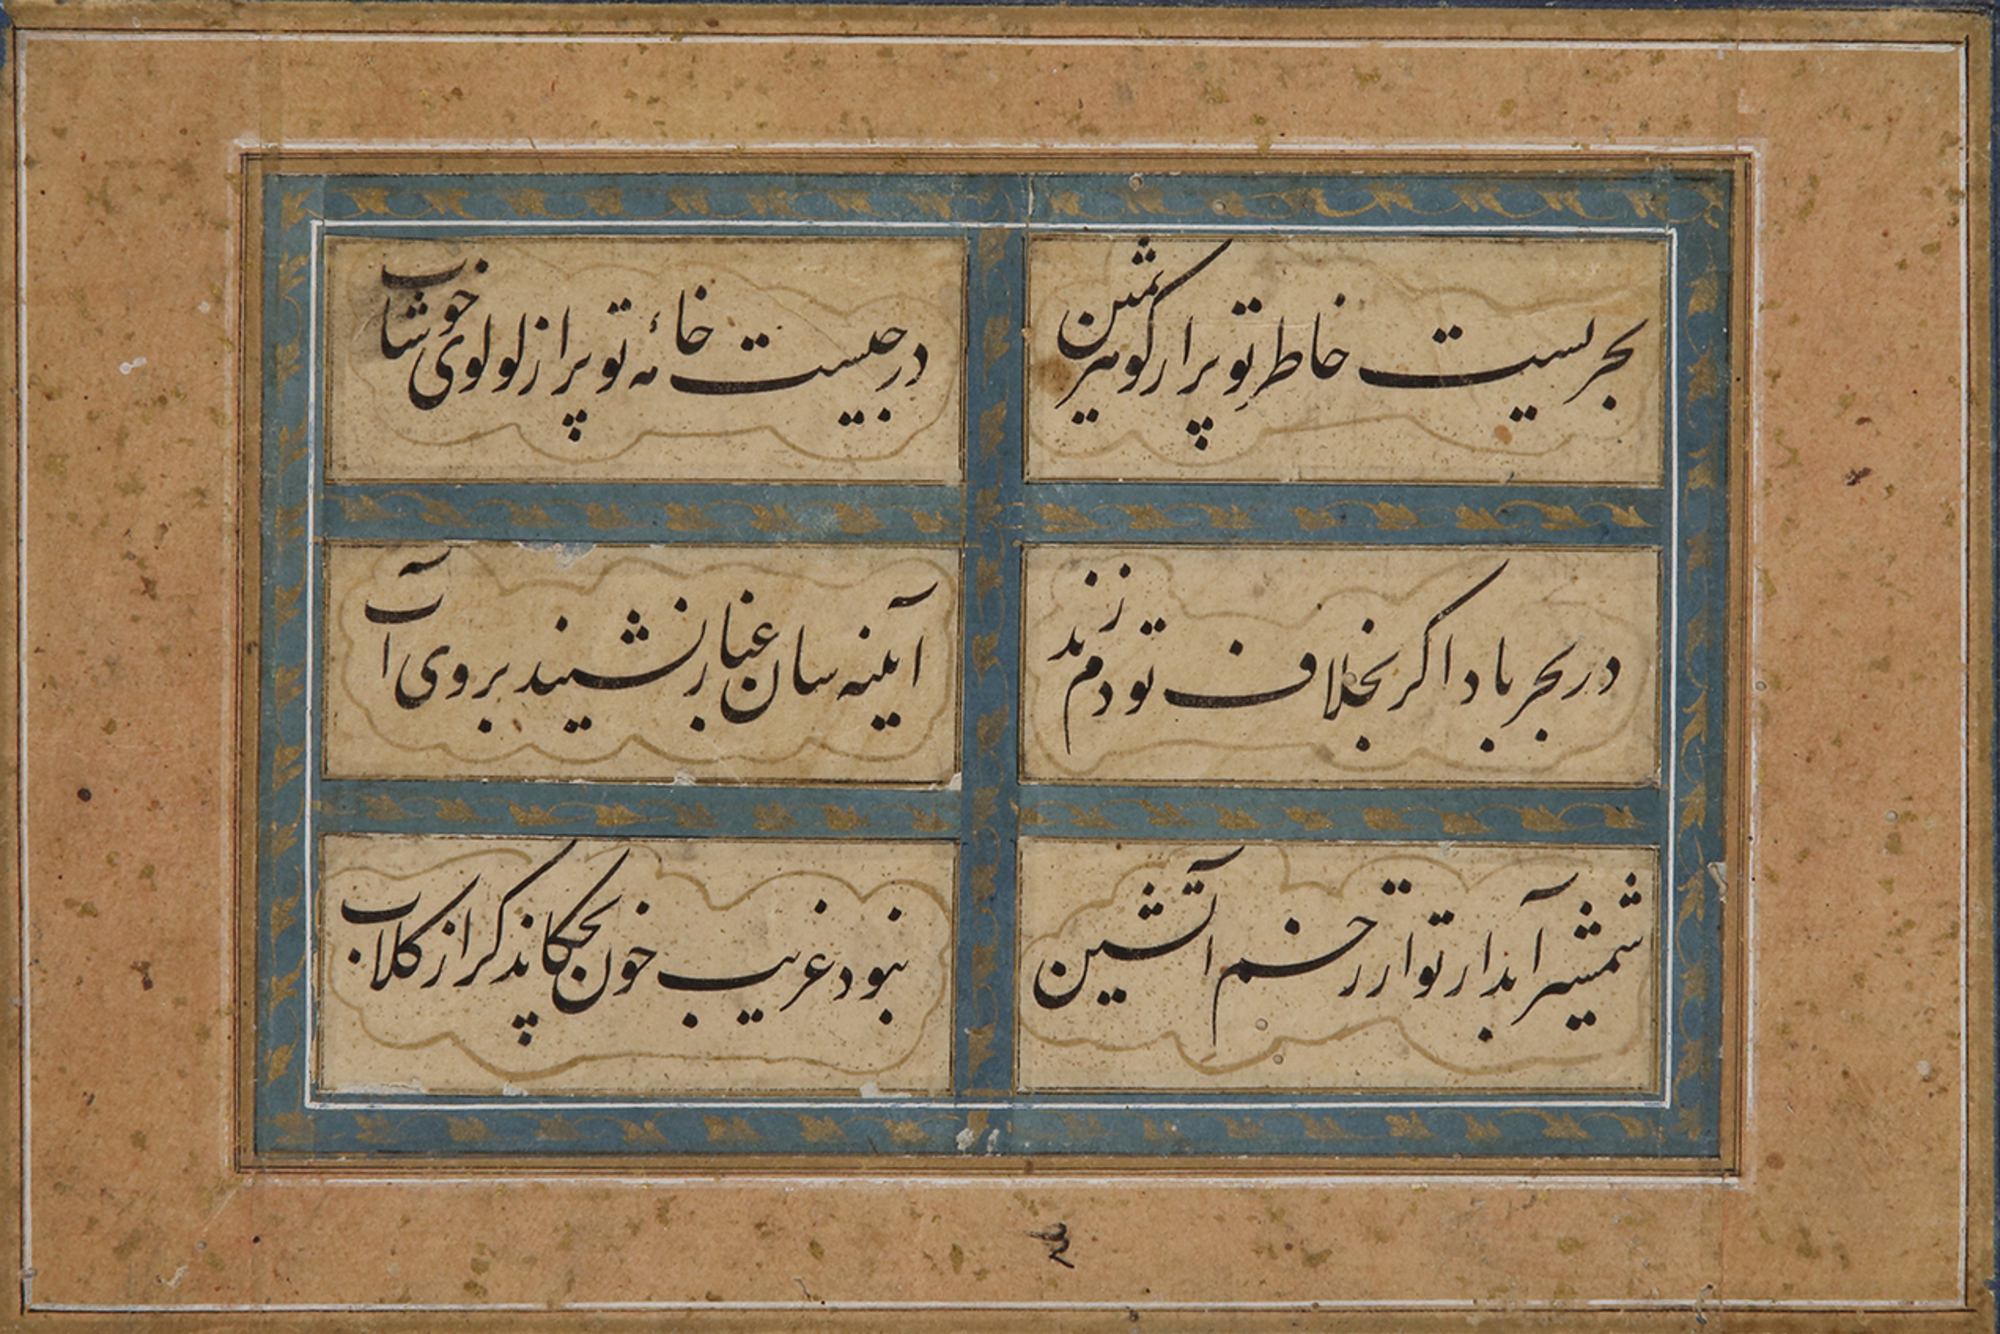 AN OTTOMAN CALLIGRAPHY PAGE FROM A MURAQQA ALBUM, TURKEY, 18TH CENTURY - Image 2 of 4